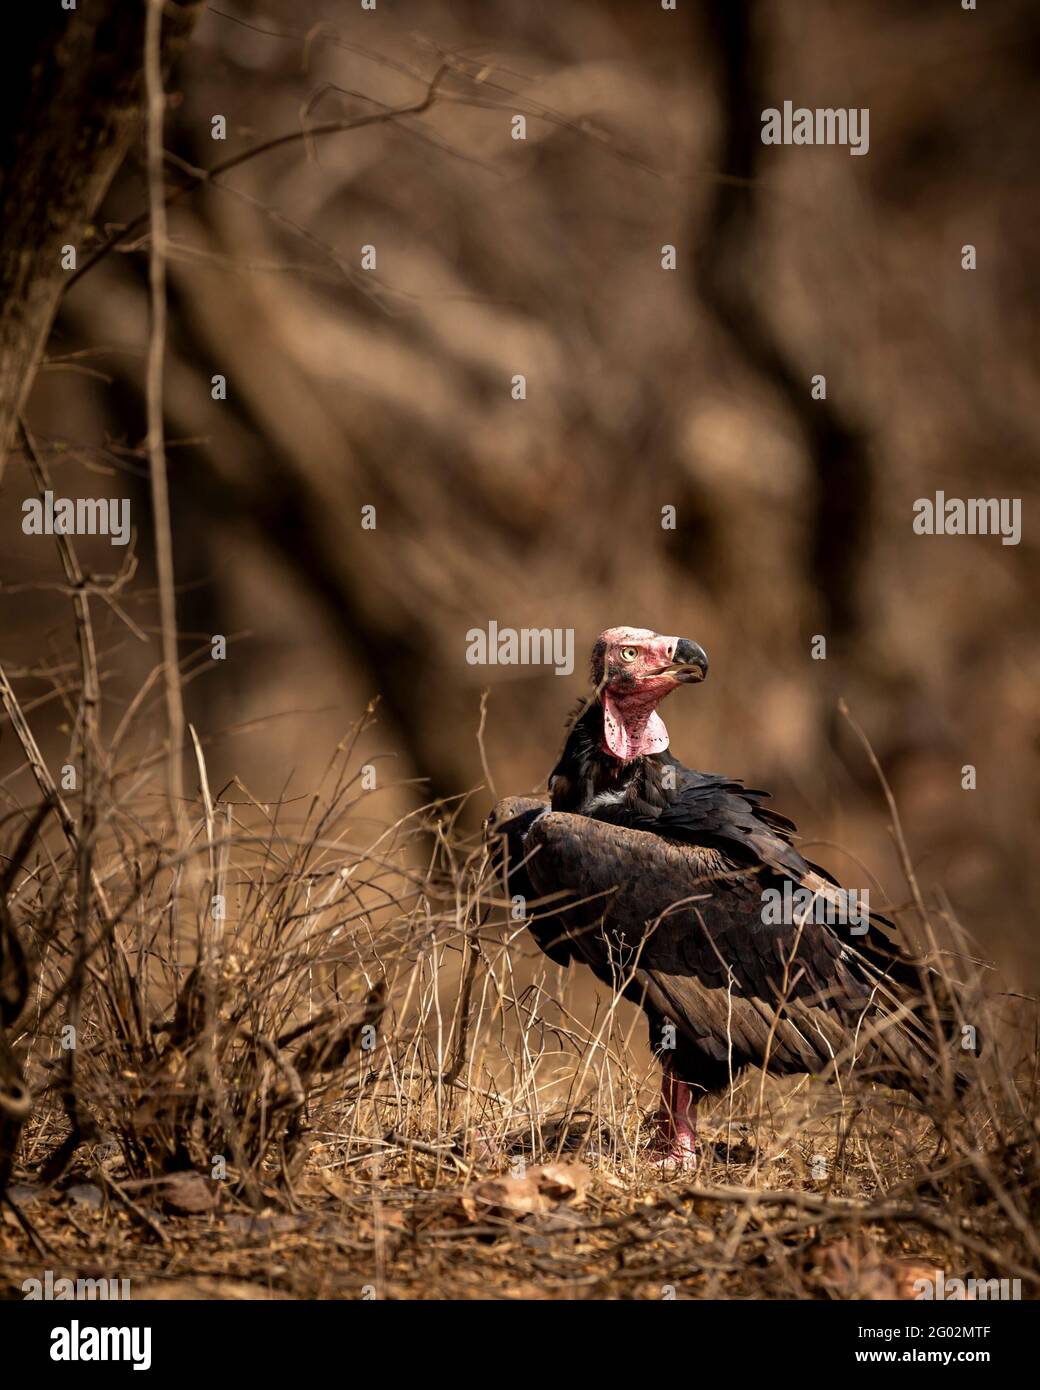 red headed vulture or sarcogyps calvus or Asian king or Indian black vulture close up with expression at Ranthambore National Park or Tiger Reserve Stock Photo